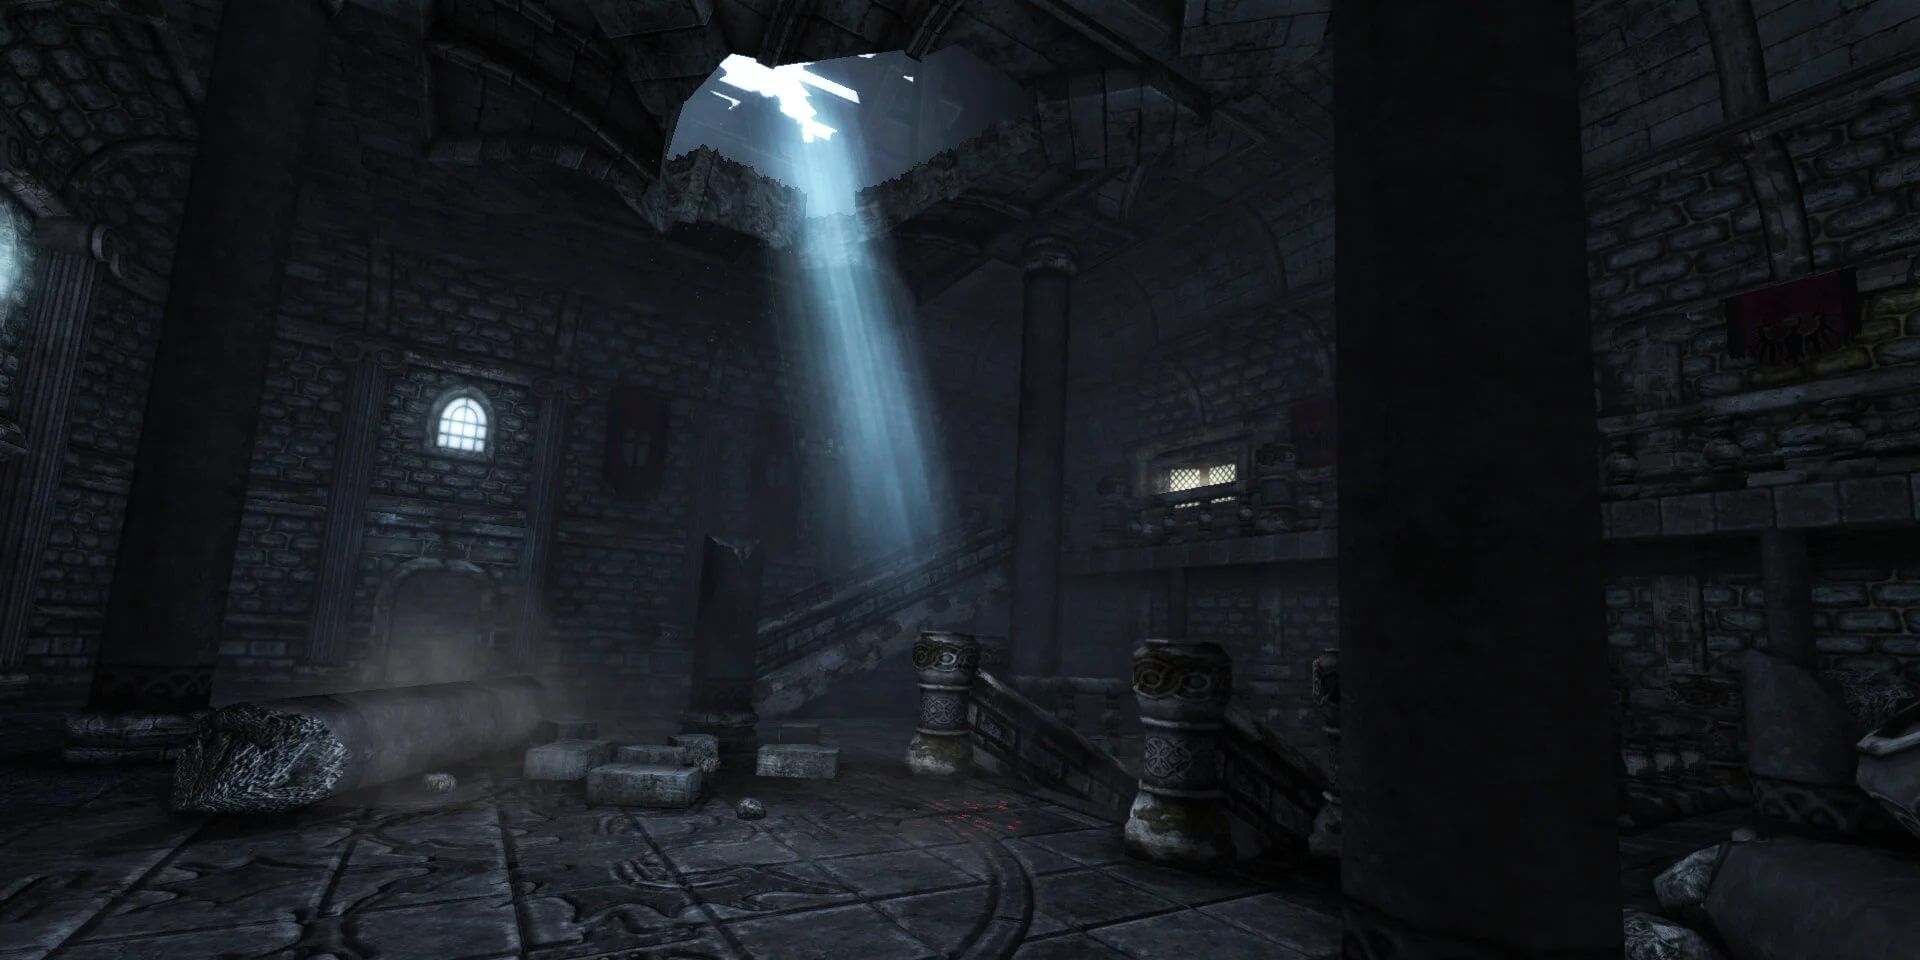 Dark room made of stone in Amnesia The Dark Descent. There is light coming through a hole in the ceiling